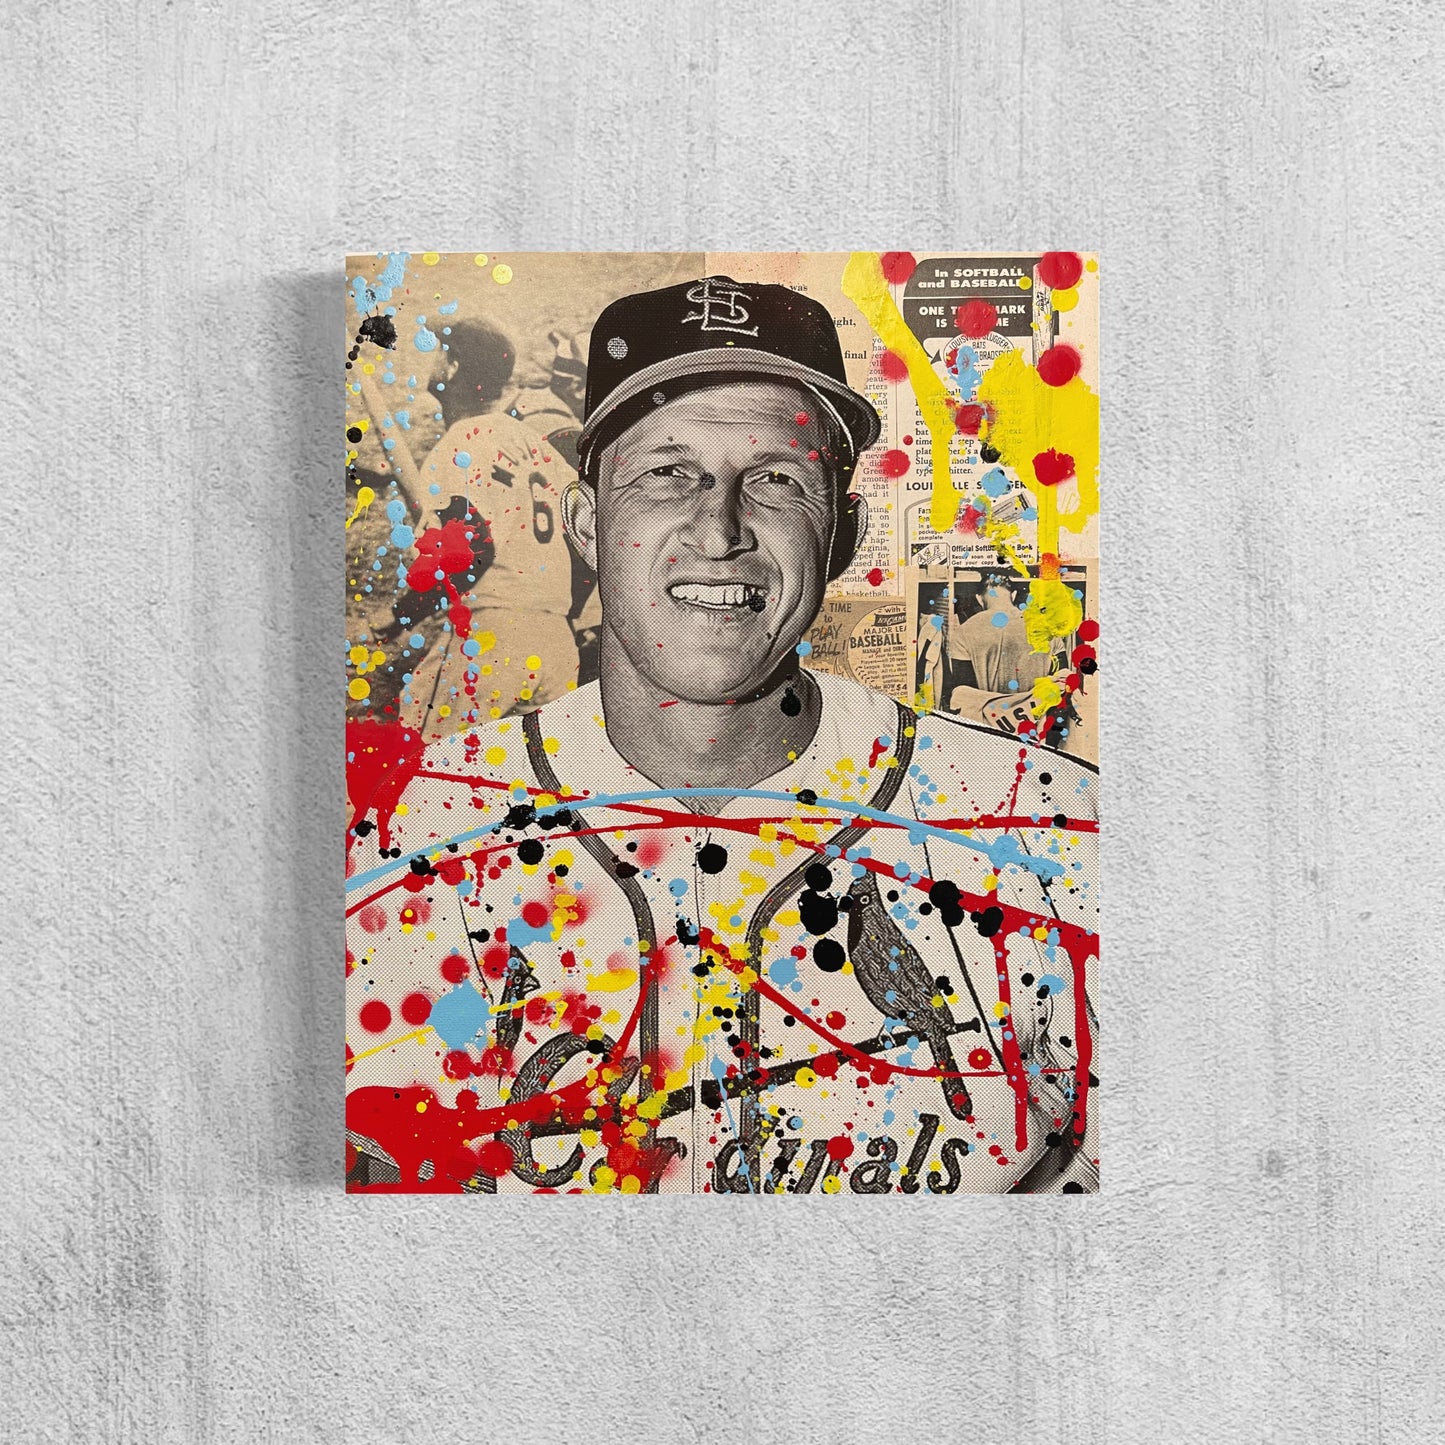 Stan Musial, 2022. Original 1/1 Art on 11x14x1.5in canvas.